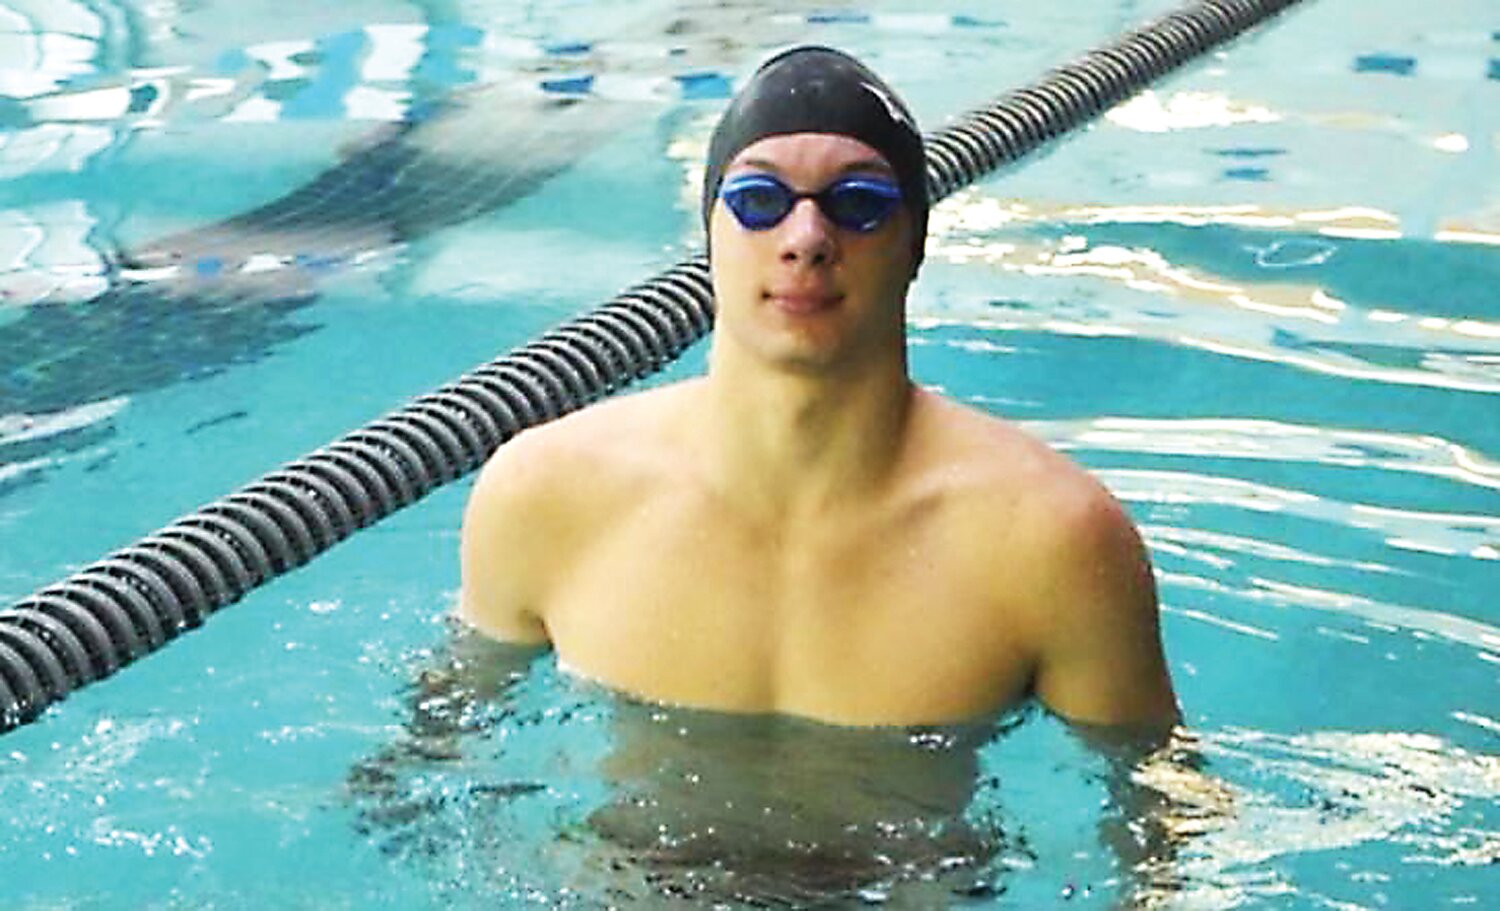 Marcus Papanikolaou, a standout swimmer at CB East remembered for his genuine smile and cheerful disposition, was killed in a single car accident on Oct. 13 in Northampton Township.